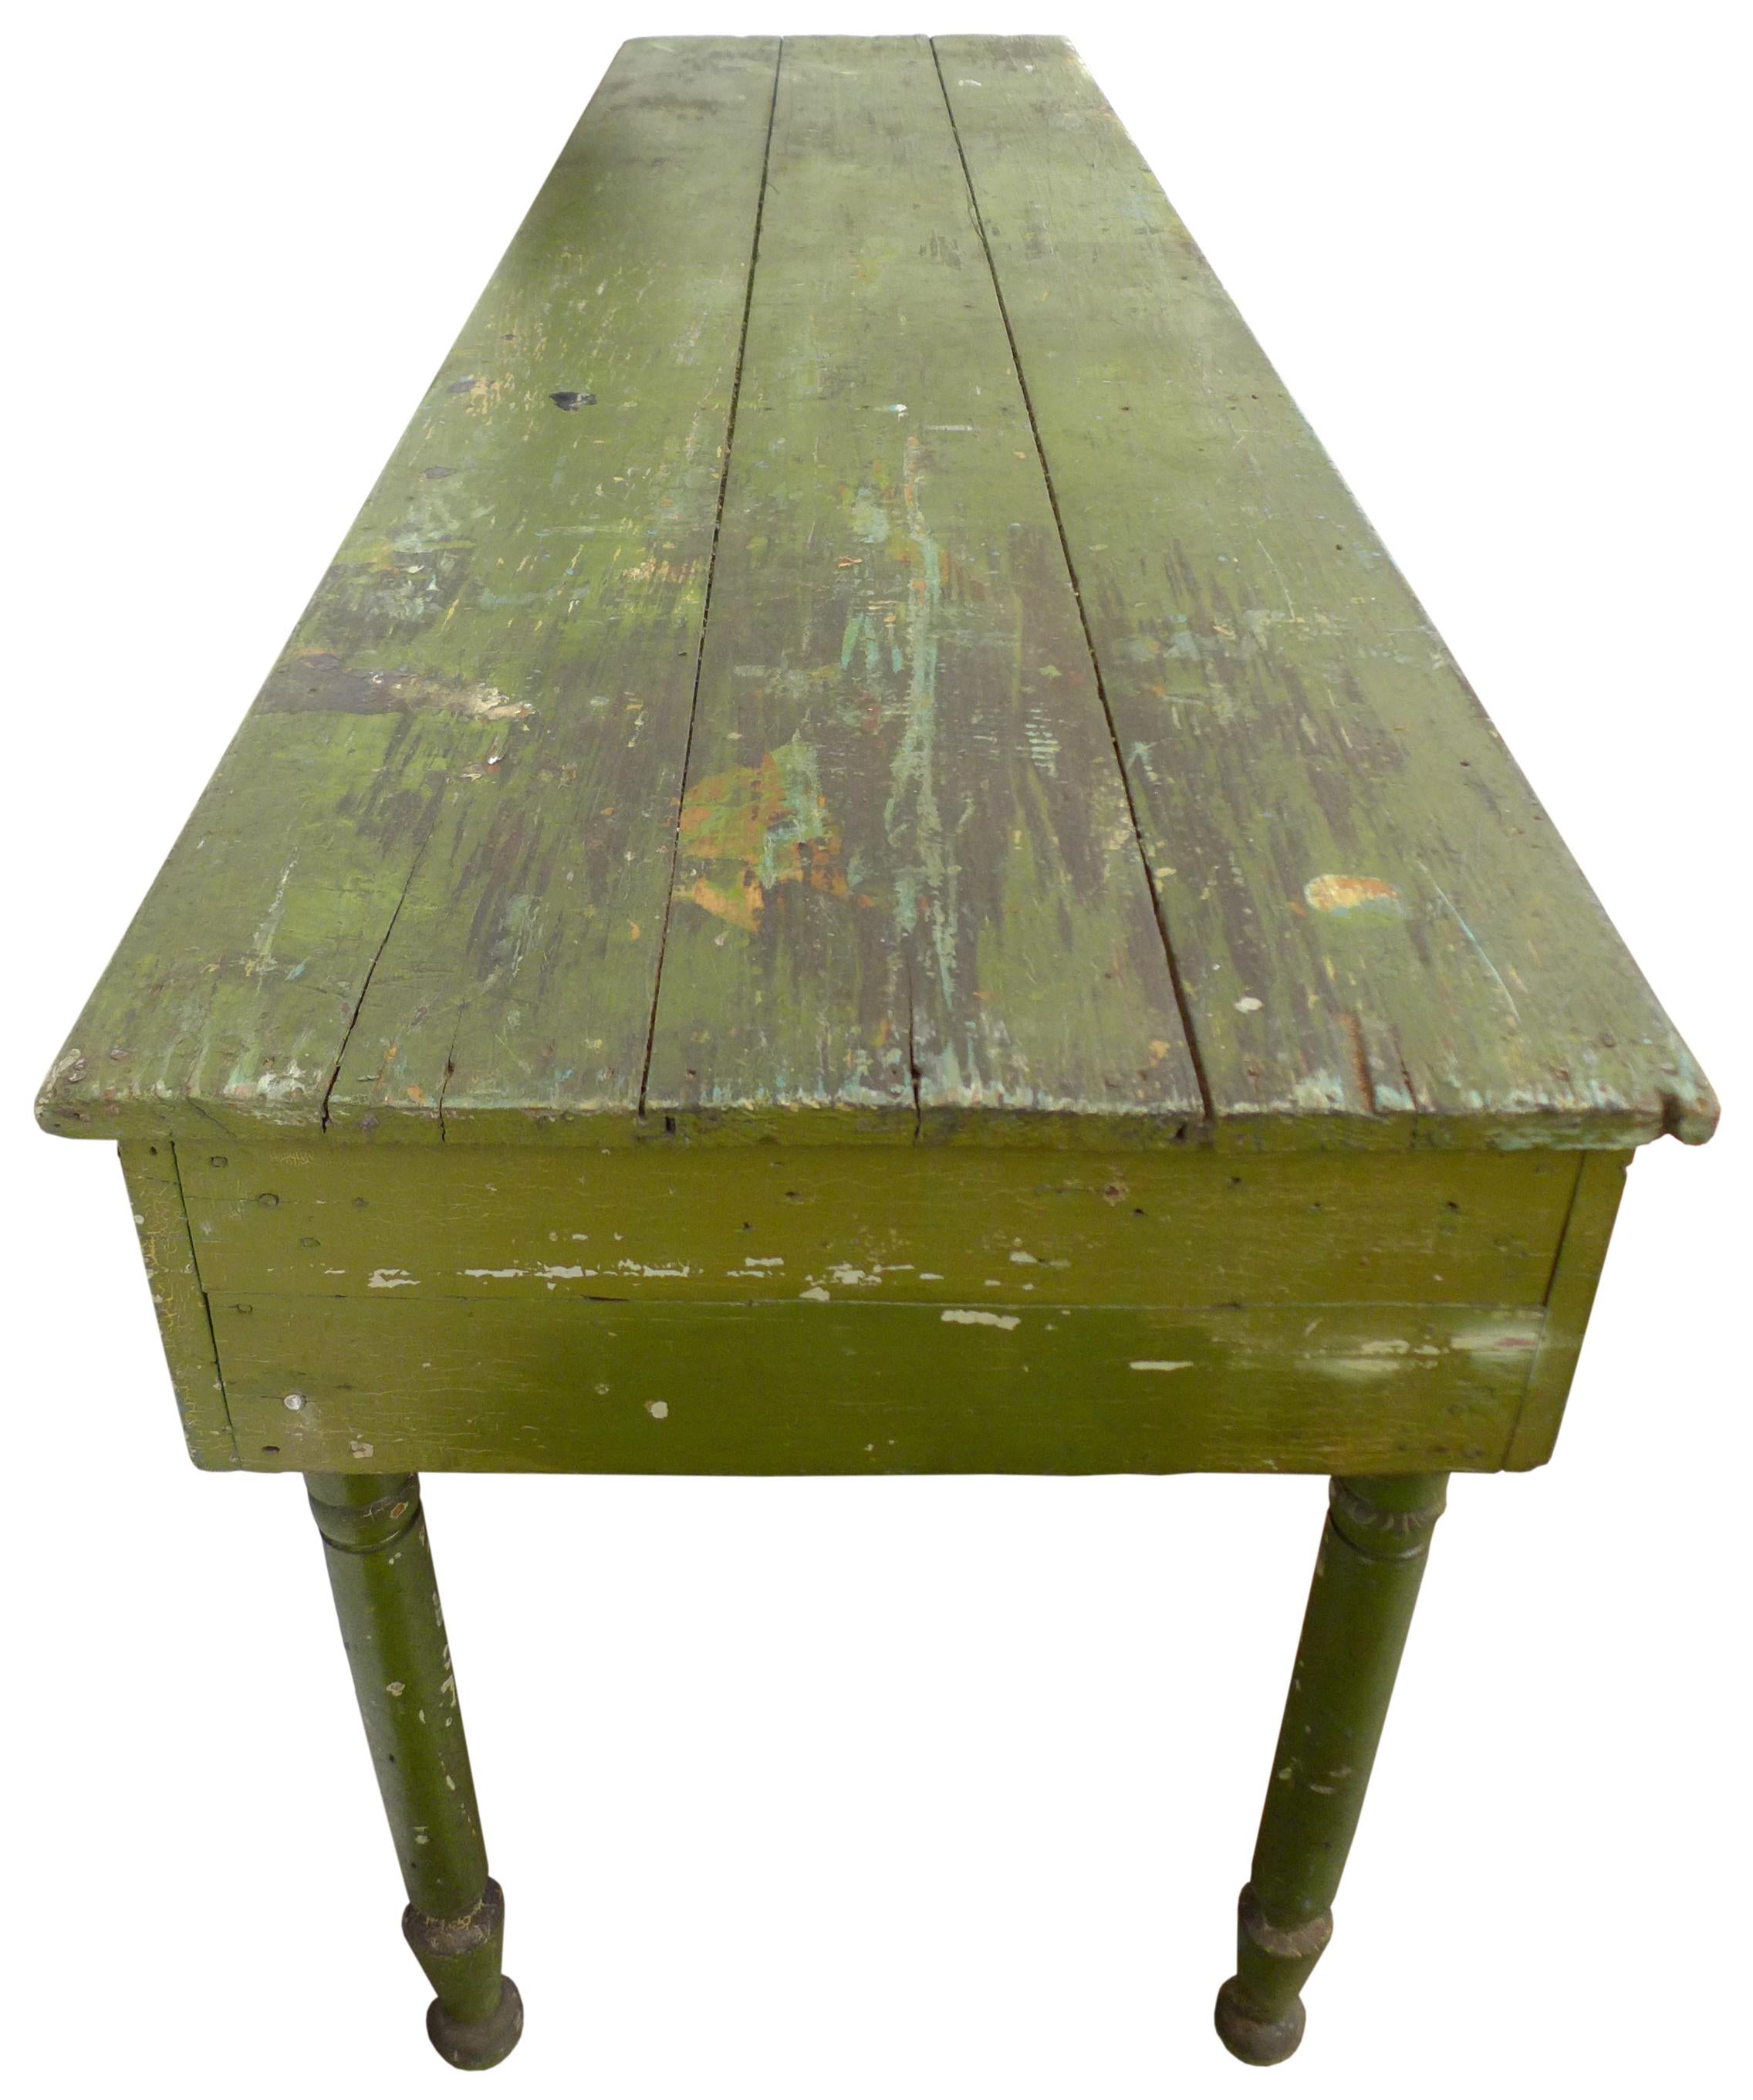 Hand-Painted Unusual 5-Legged Rustic Console or Work Table For Sale